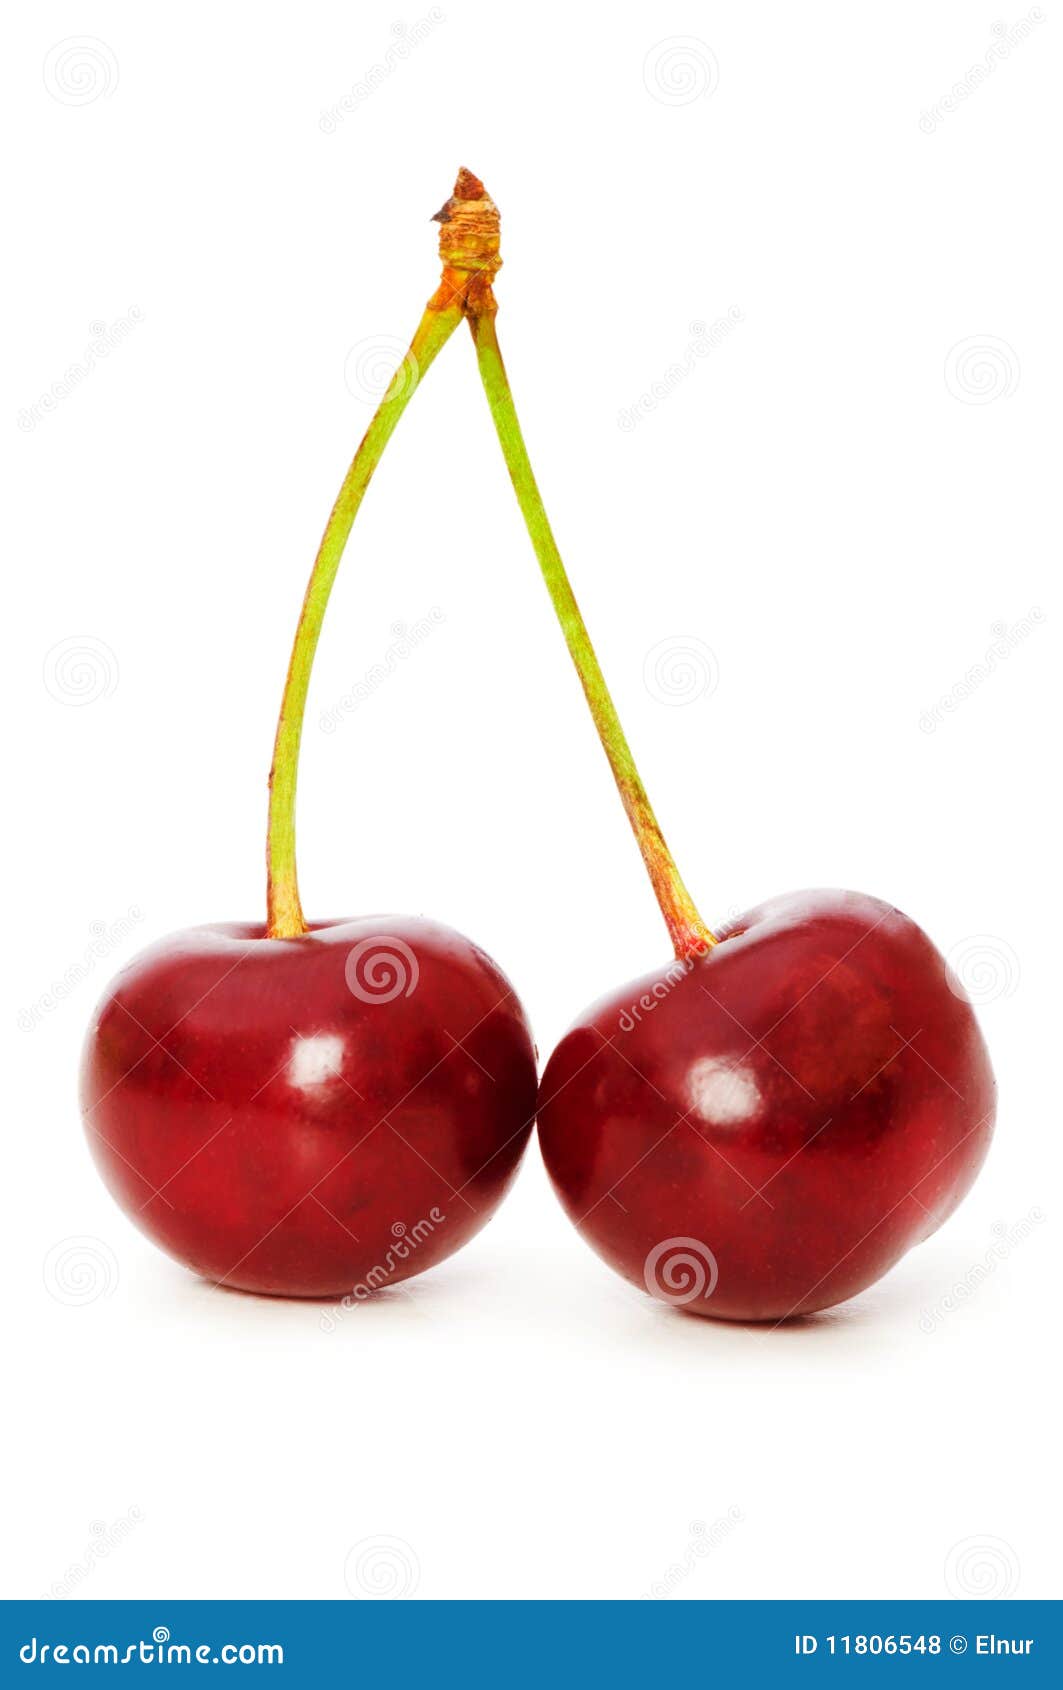 Cherries isolated stock photo. Image of background, closeup - 11806548